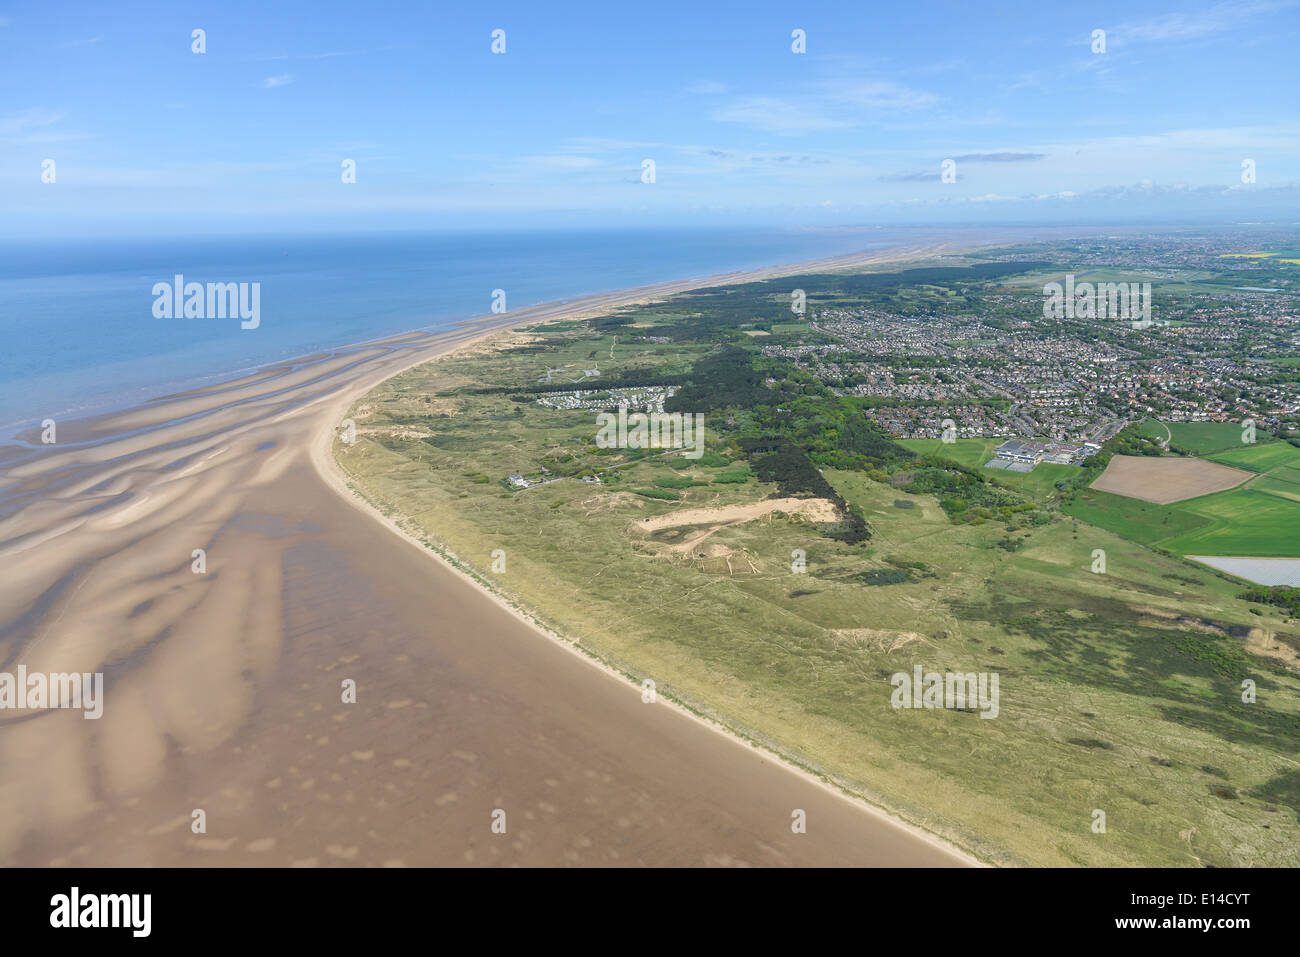 An aerial view looking North up the coast of Lancashire with part of Formby visible. Stock Photo